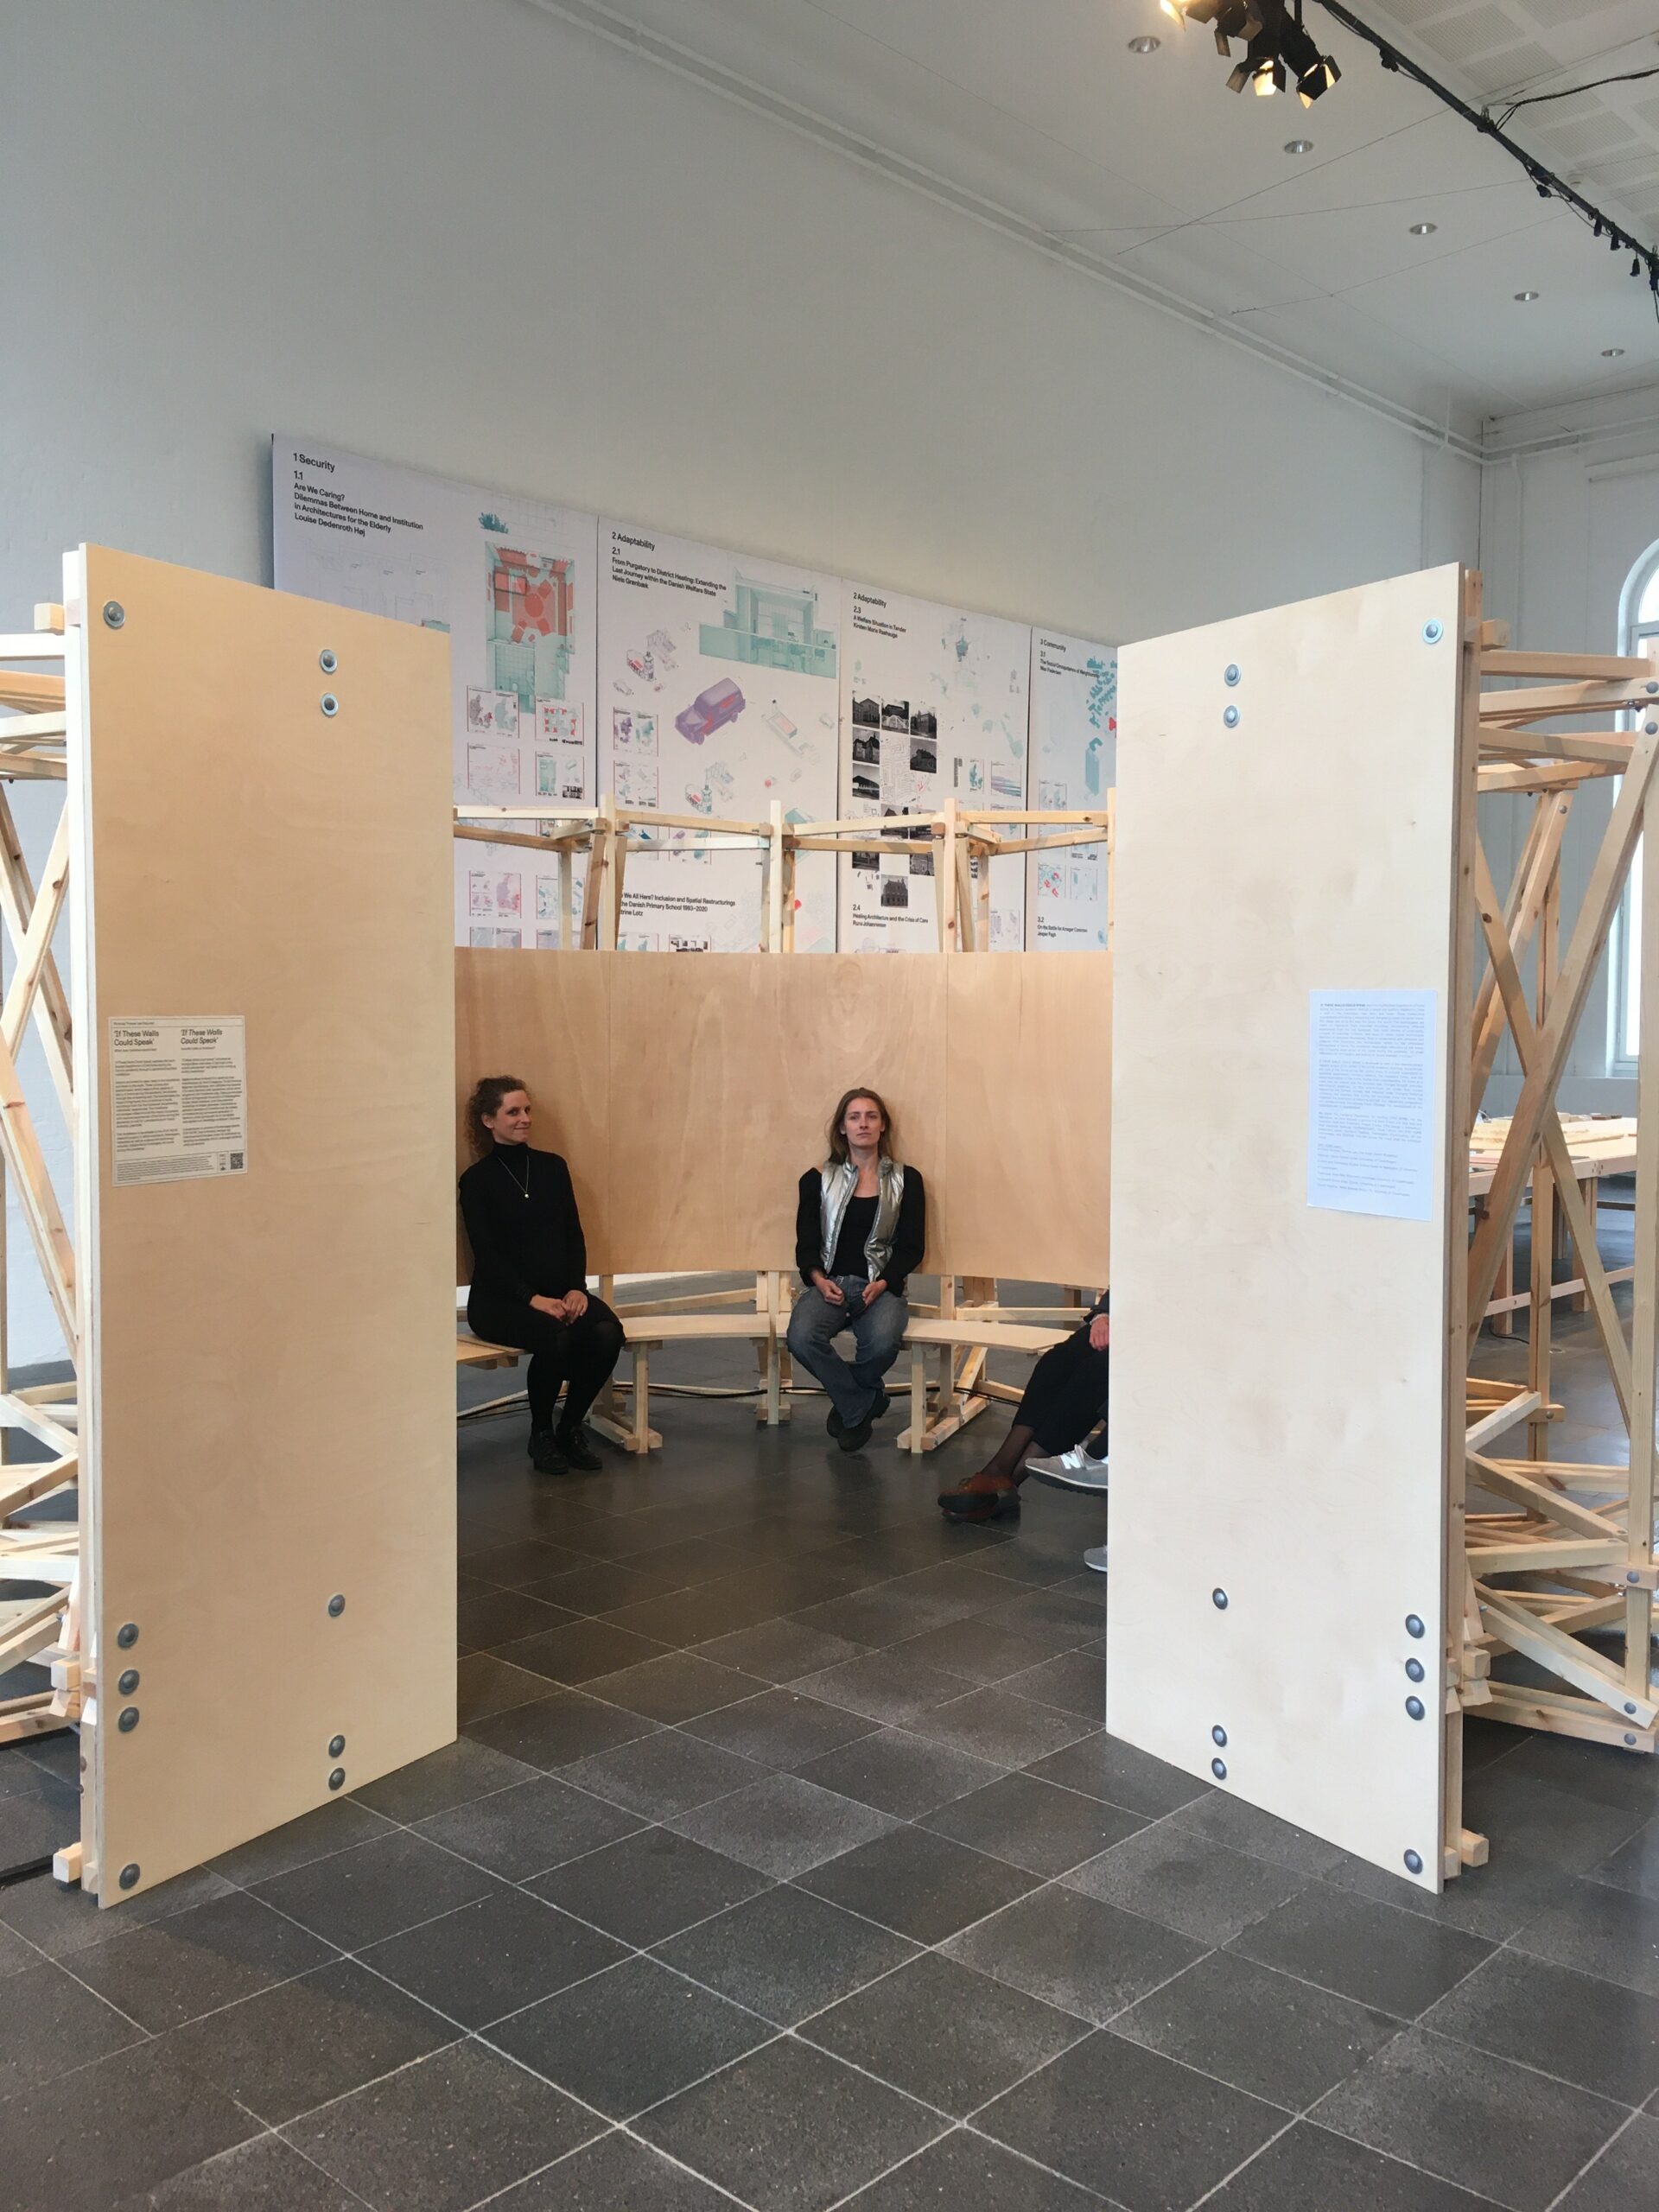 A picture of the wooden installation IF THESE WALLS COULD SPEAK by the STAY HOME team